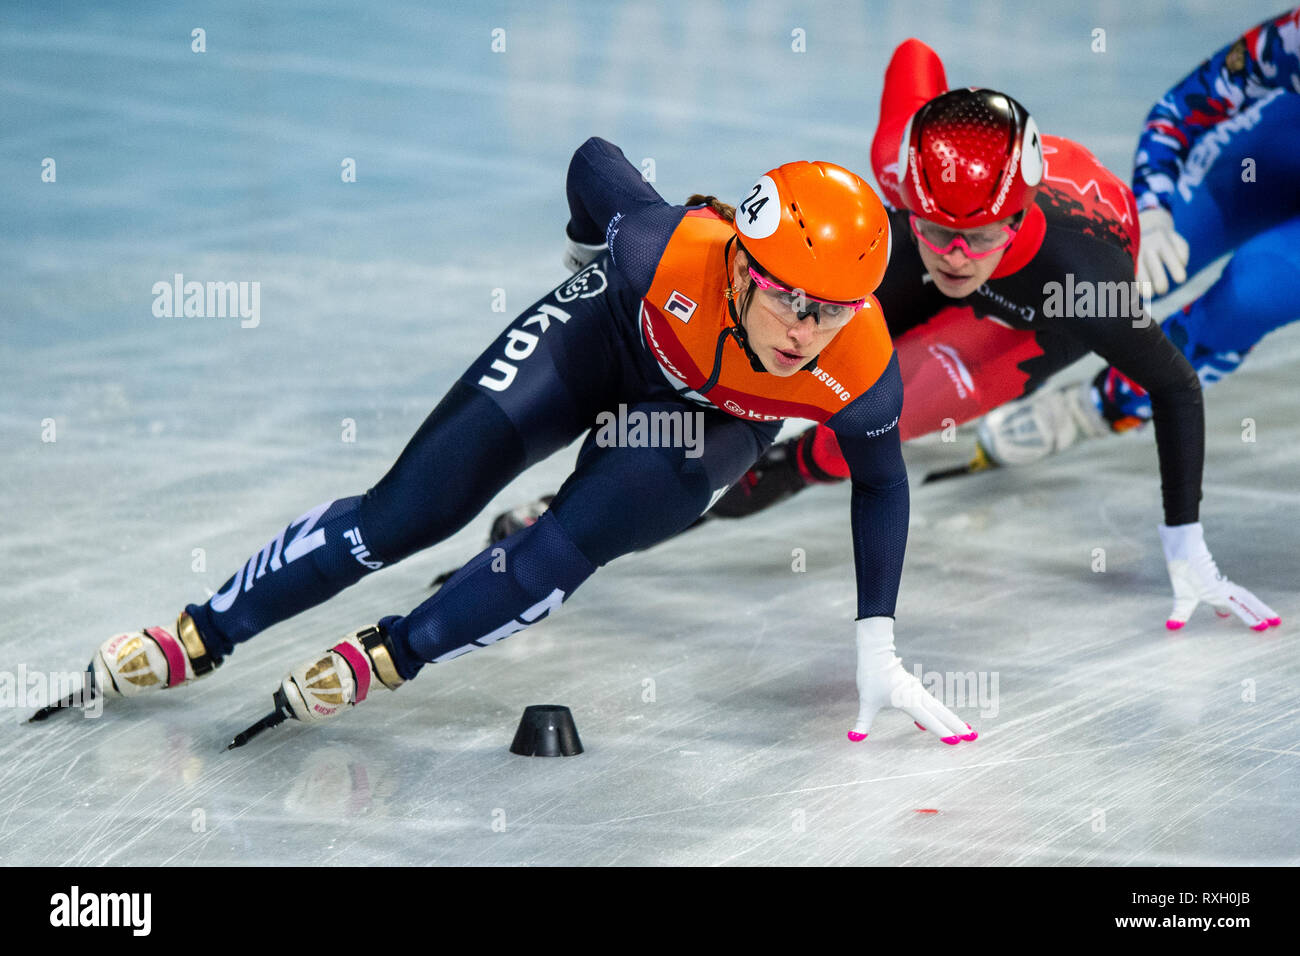 9th of march 2019 Sofia, Bulgaria ISU World Short Track Speed Skating Championships  Suzanne Schulting, Kim Boutin Credit: Orange Pictures vof/Alamy Live News Credit: Orange Pictures vof/Alamy Live News Stock Photo